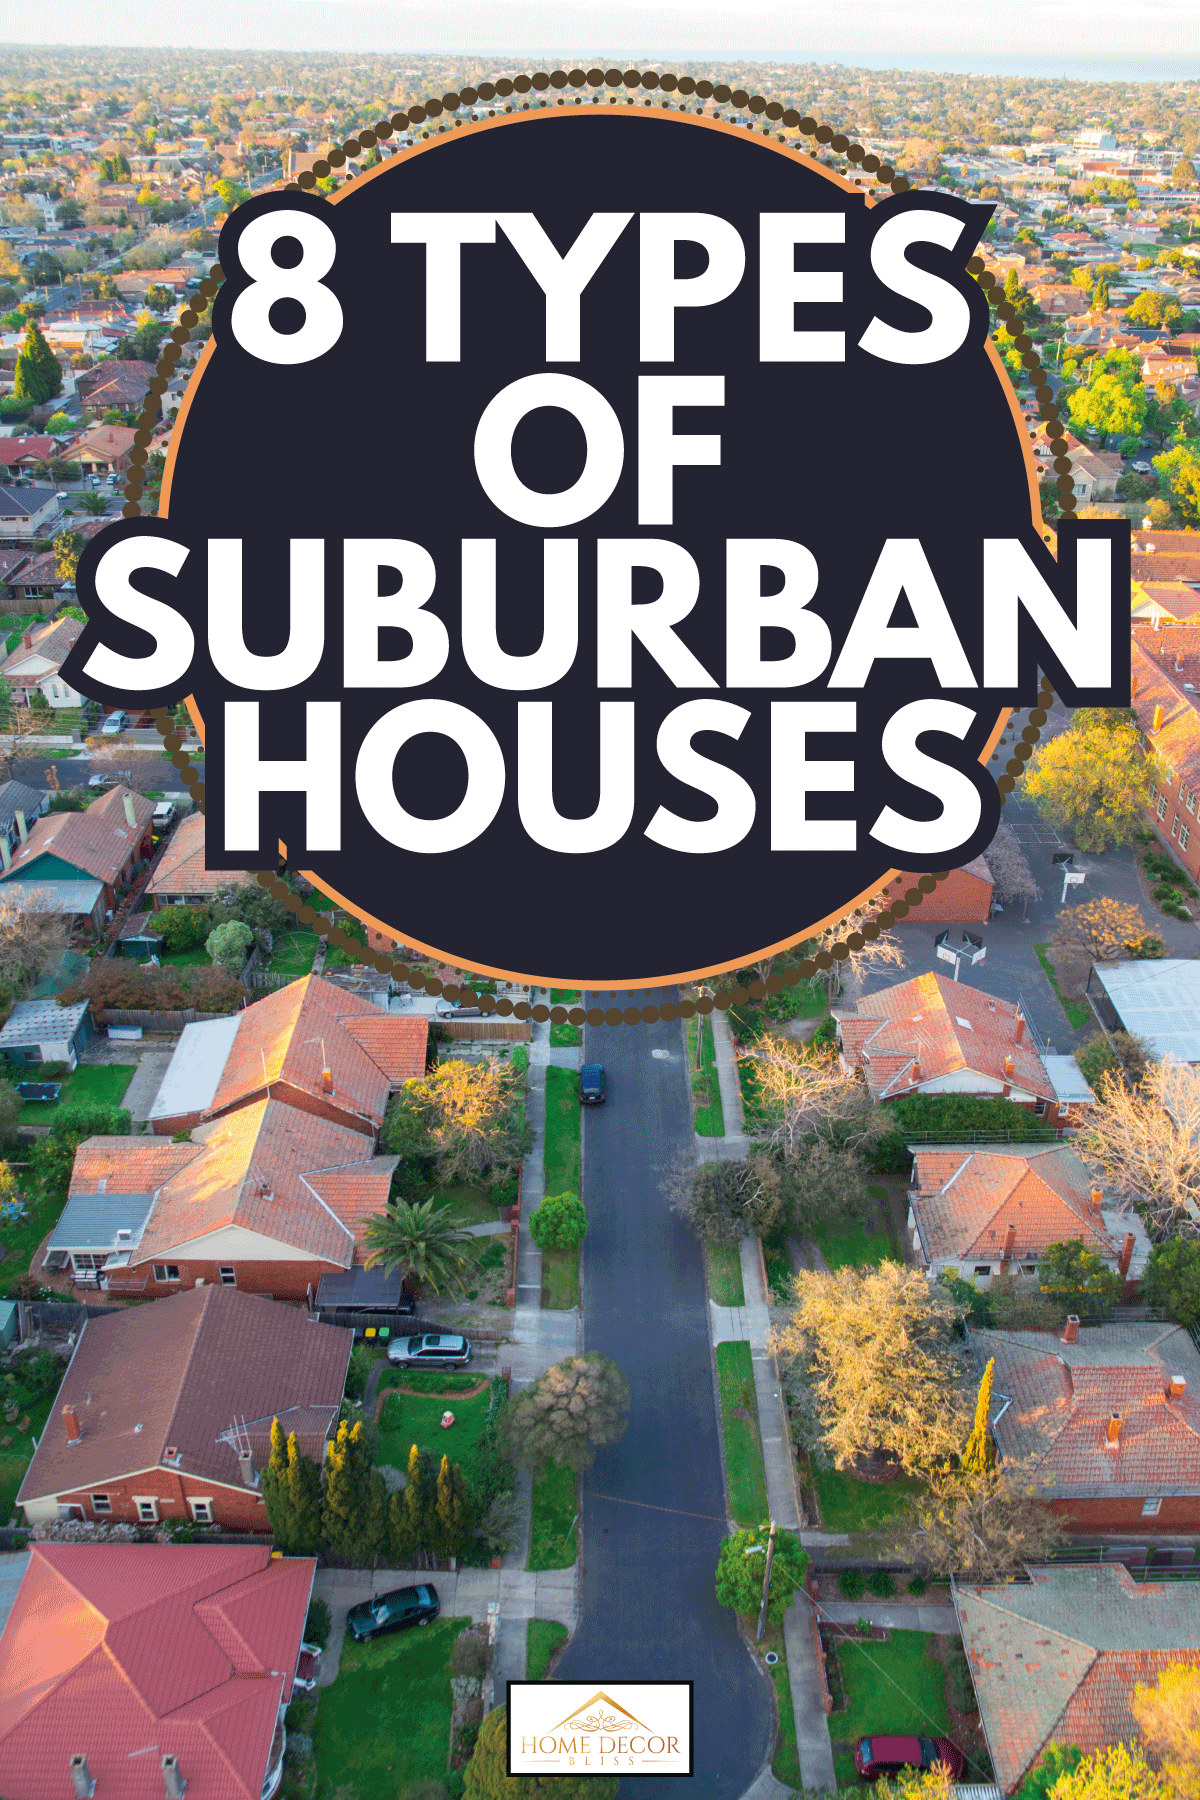 Aerial view of a typical American residential suburban street. 8 Types Of Suburban Houses